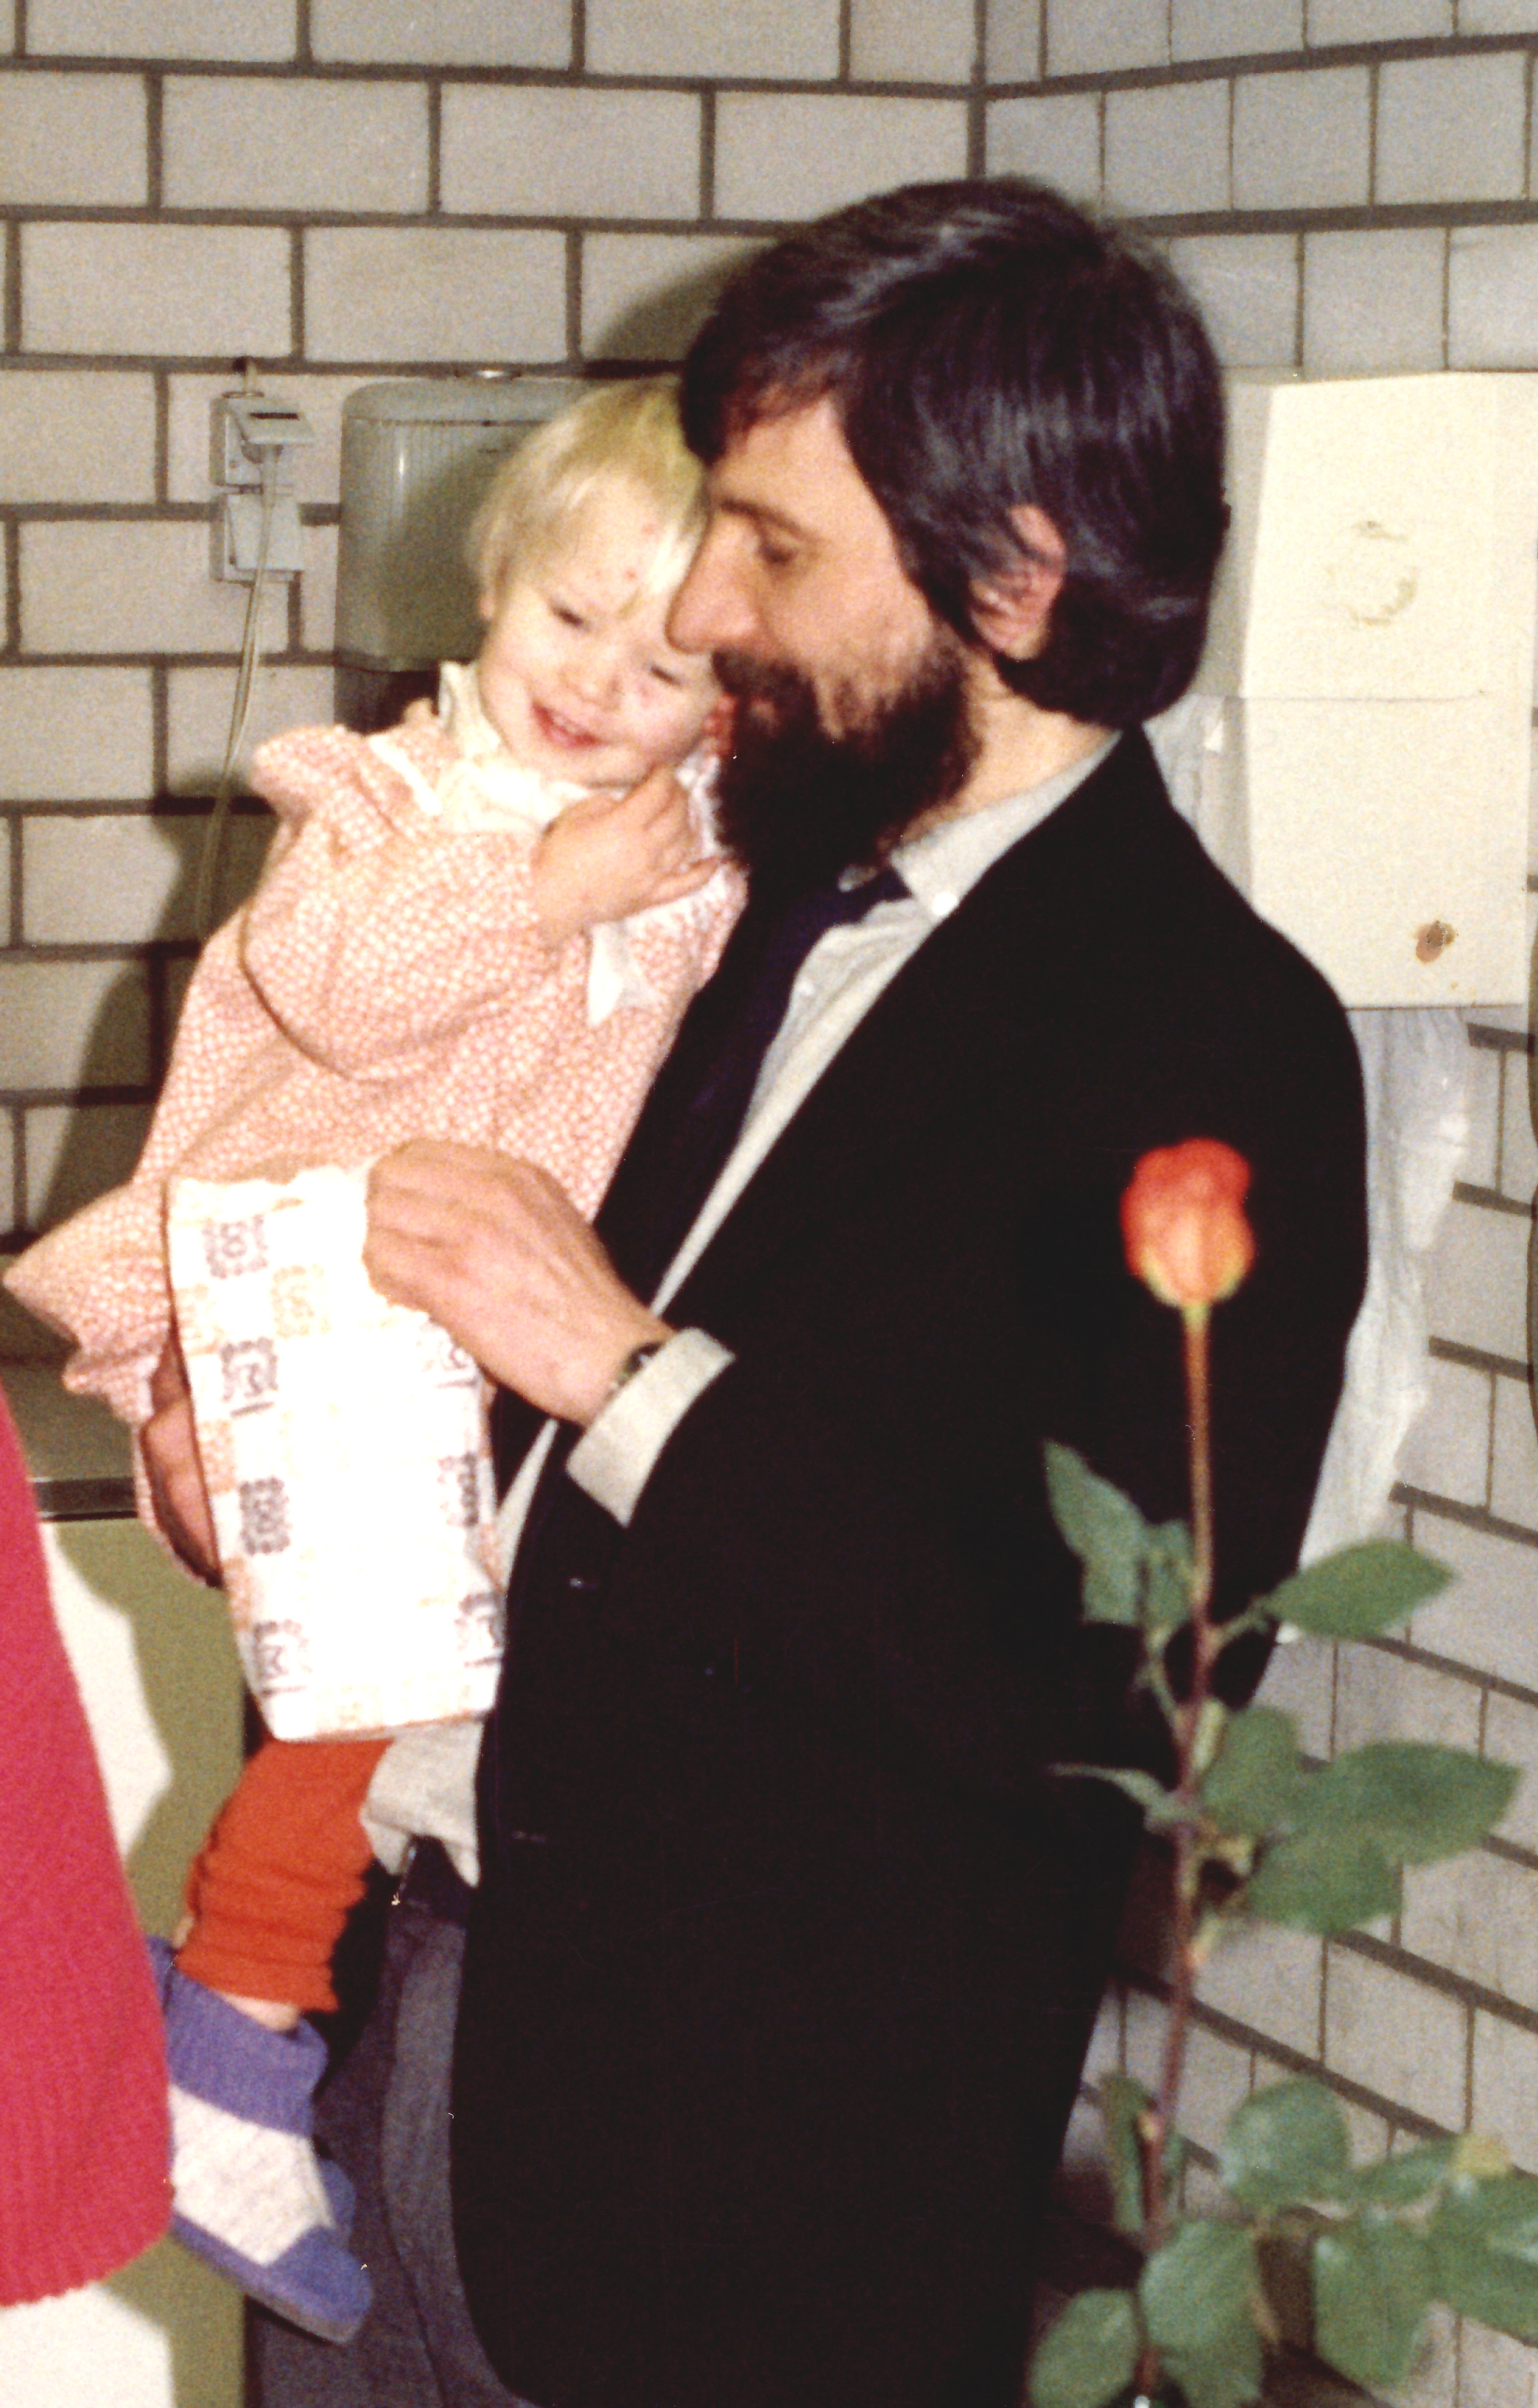 PhD celebration in 1987 with Maximilian Haider`s youngest daughter